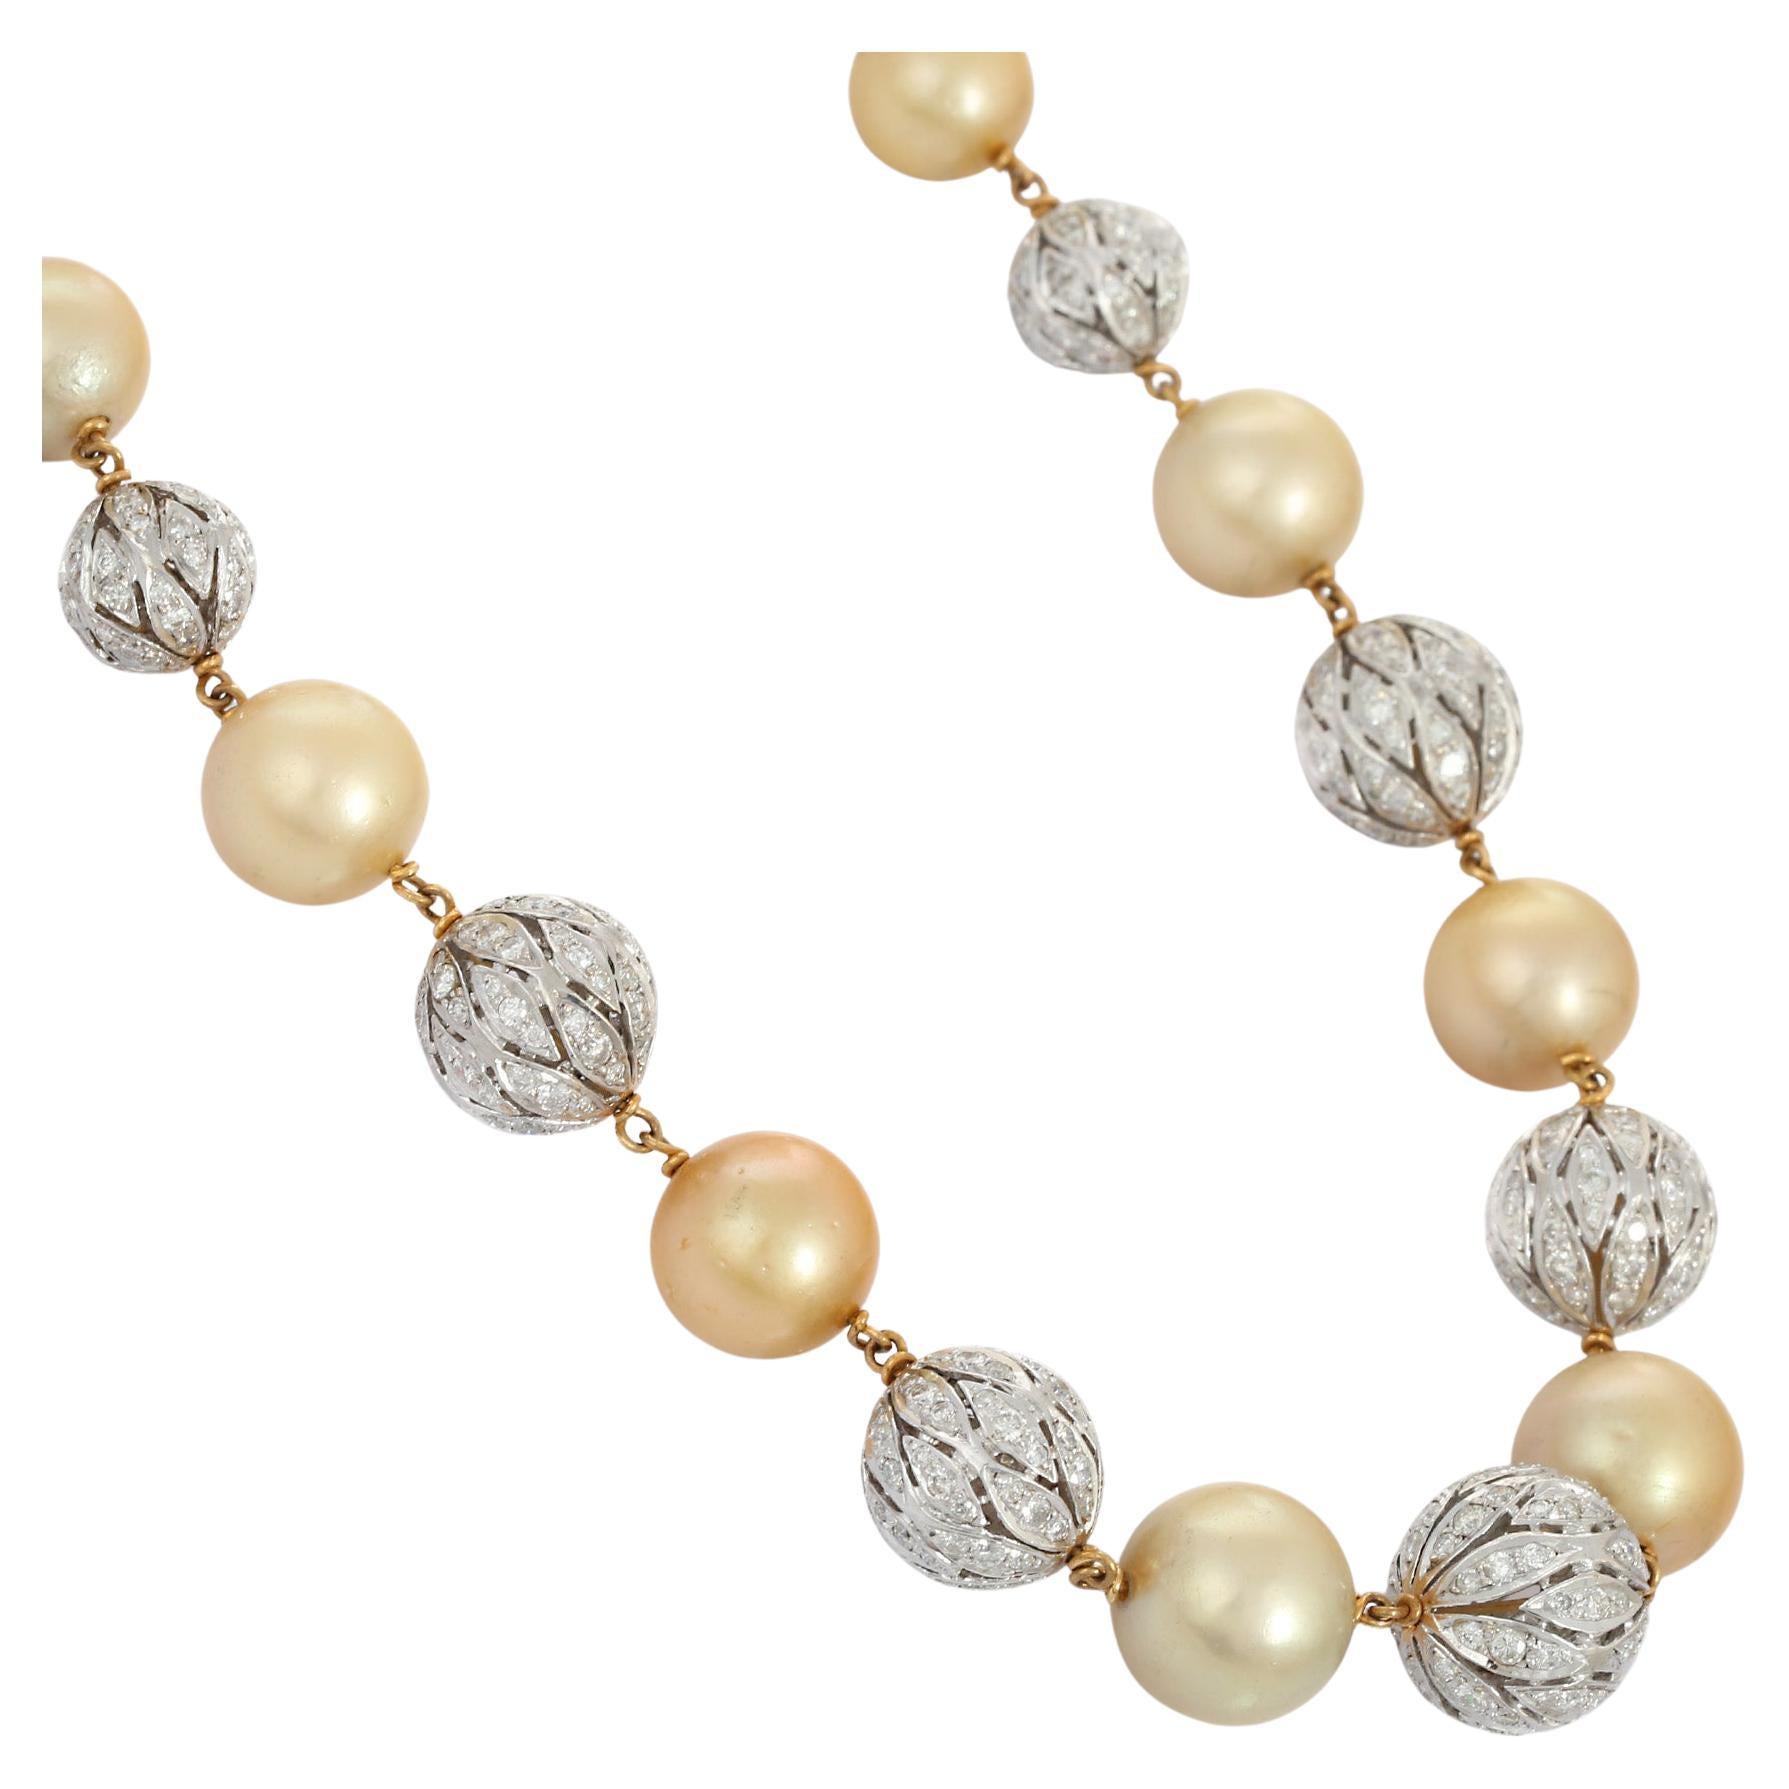 16.5 Carat Diamond Pearl Beaded Necklace in 14K Yellow Gold 